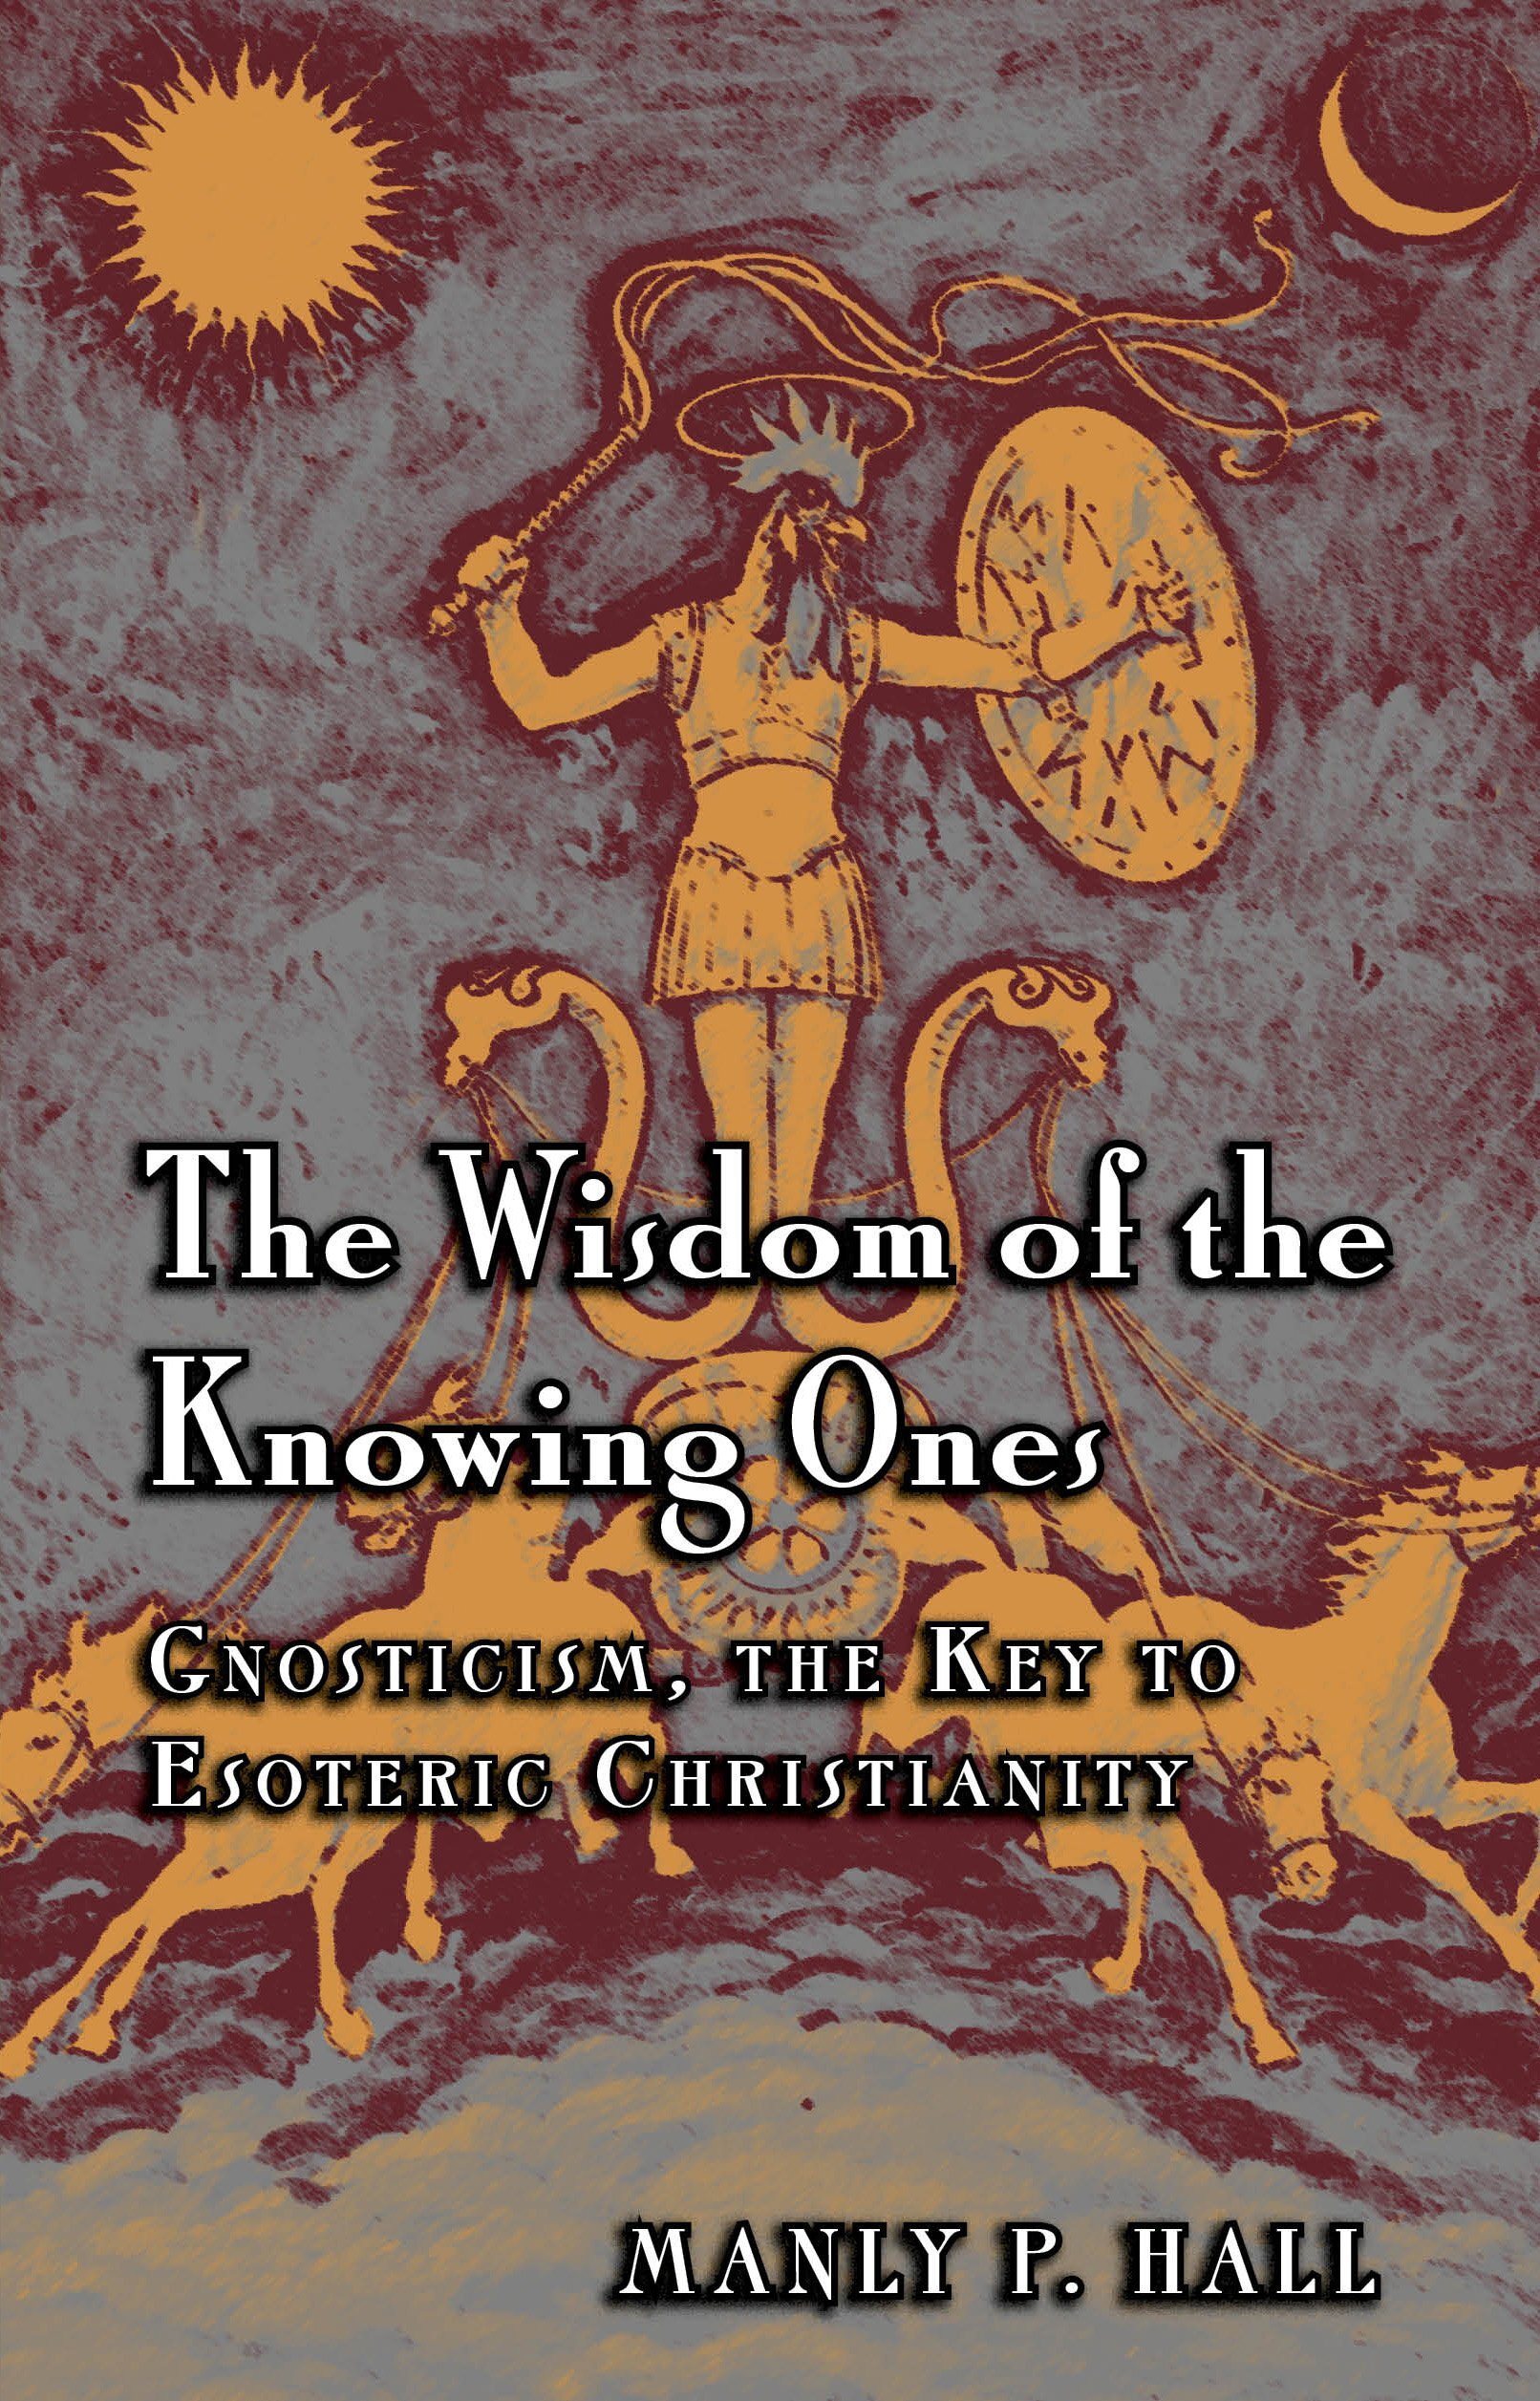 The Wisdom of the Knowing Ones - Gnosticism, the Key to Esoteric Christianity